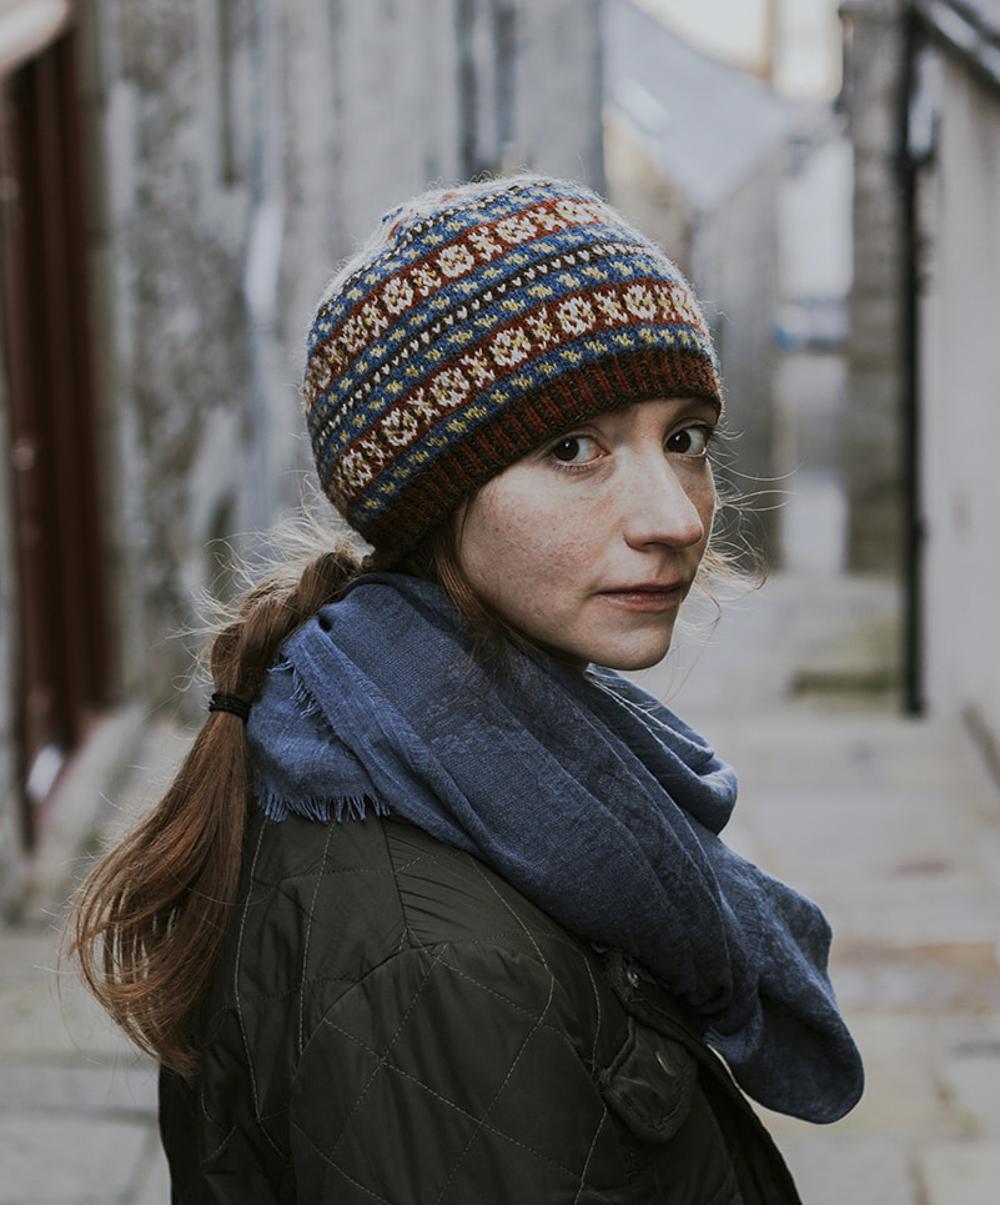 A woman with red hair turns to face the camera while wearing a richly-patterned Fair Isle beanie featuring small (peerie) patterns in the traditional palette of dark reds, indigo blues, golds and browns and greys which would have been used by Shetlanders prior to widespread availability of synthetic dyes